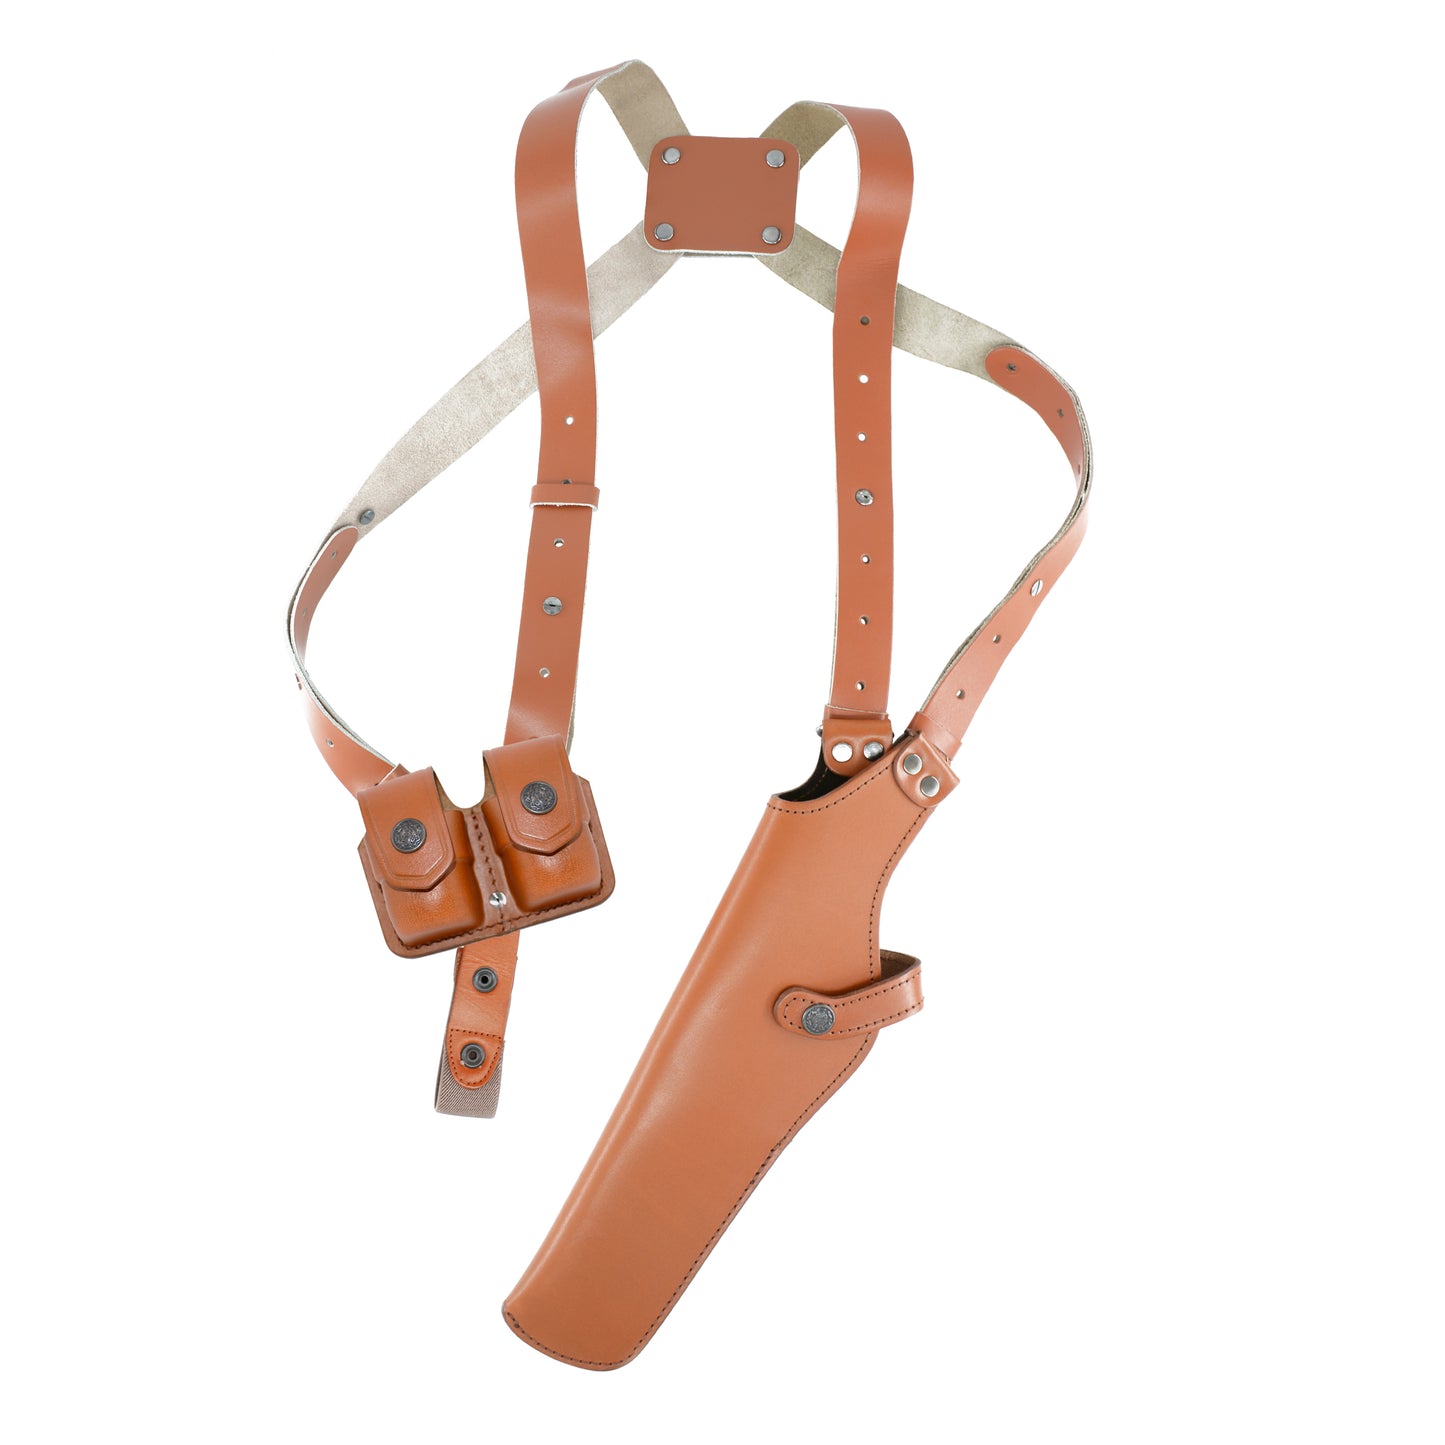 K457-357 Vertical Shoulder Holster with Double Speedloader Pouch for 357 Magnum up to 5" Barrel RH Handmade! Free Extension for Big Body Size!